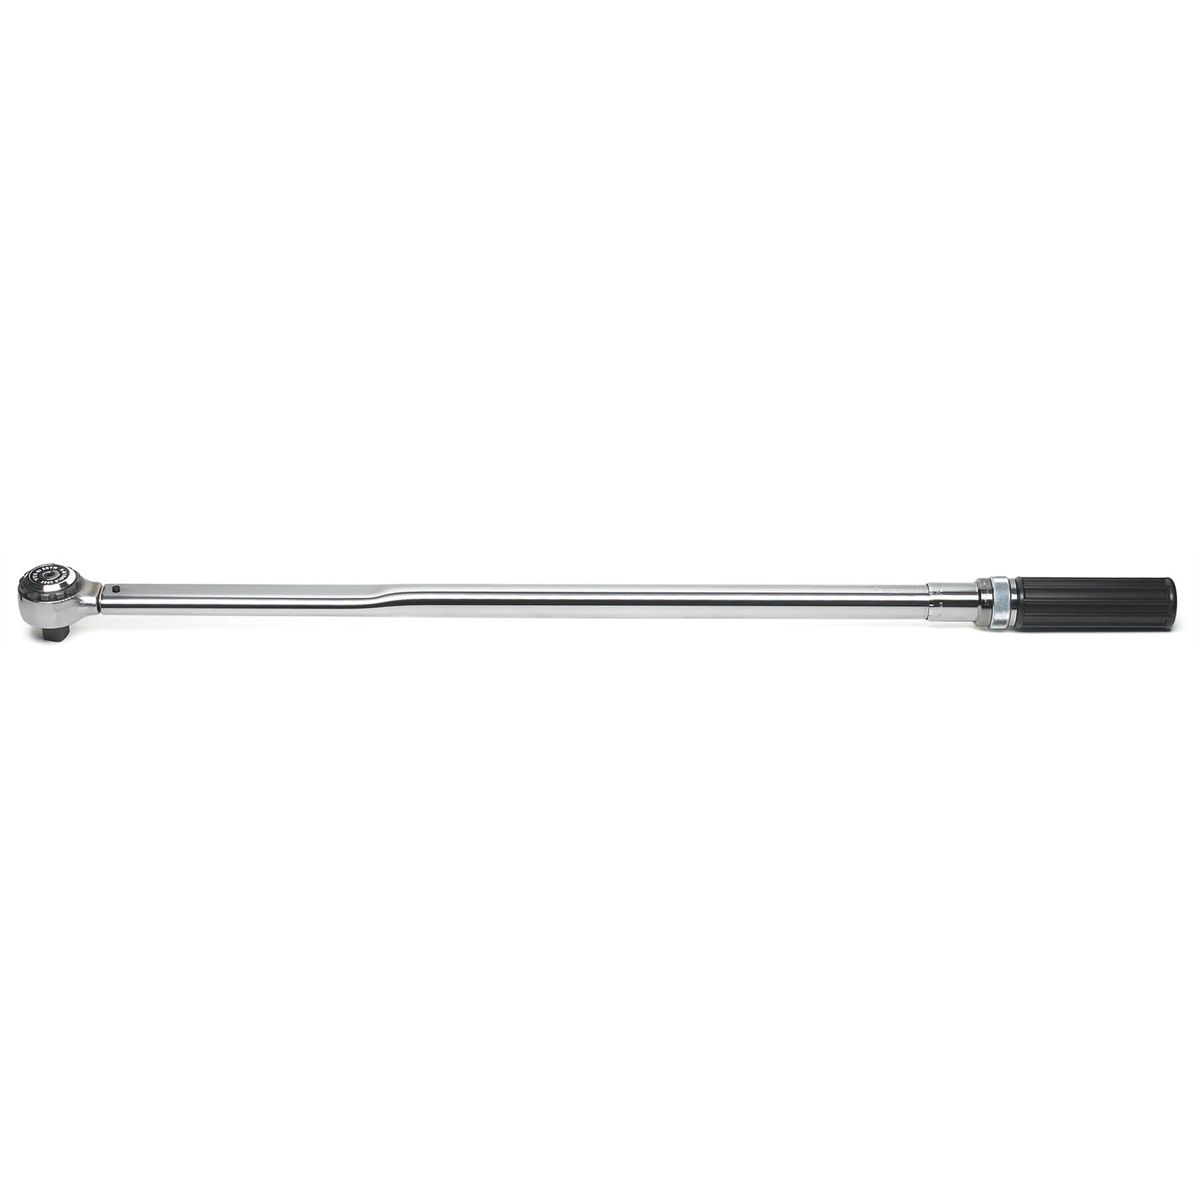 3/4 Inch Micrometer Torque Wrench - 100-600 ft-lbs